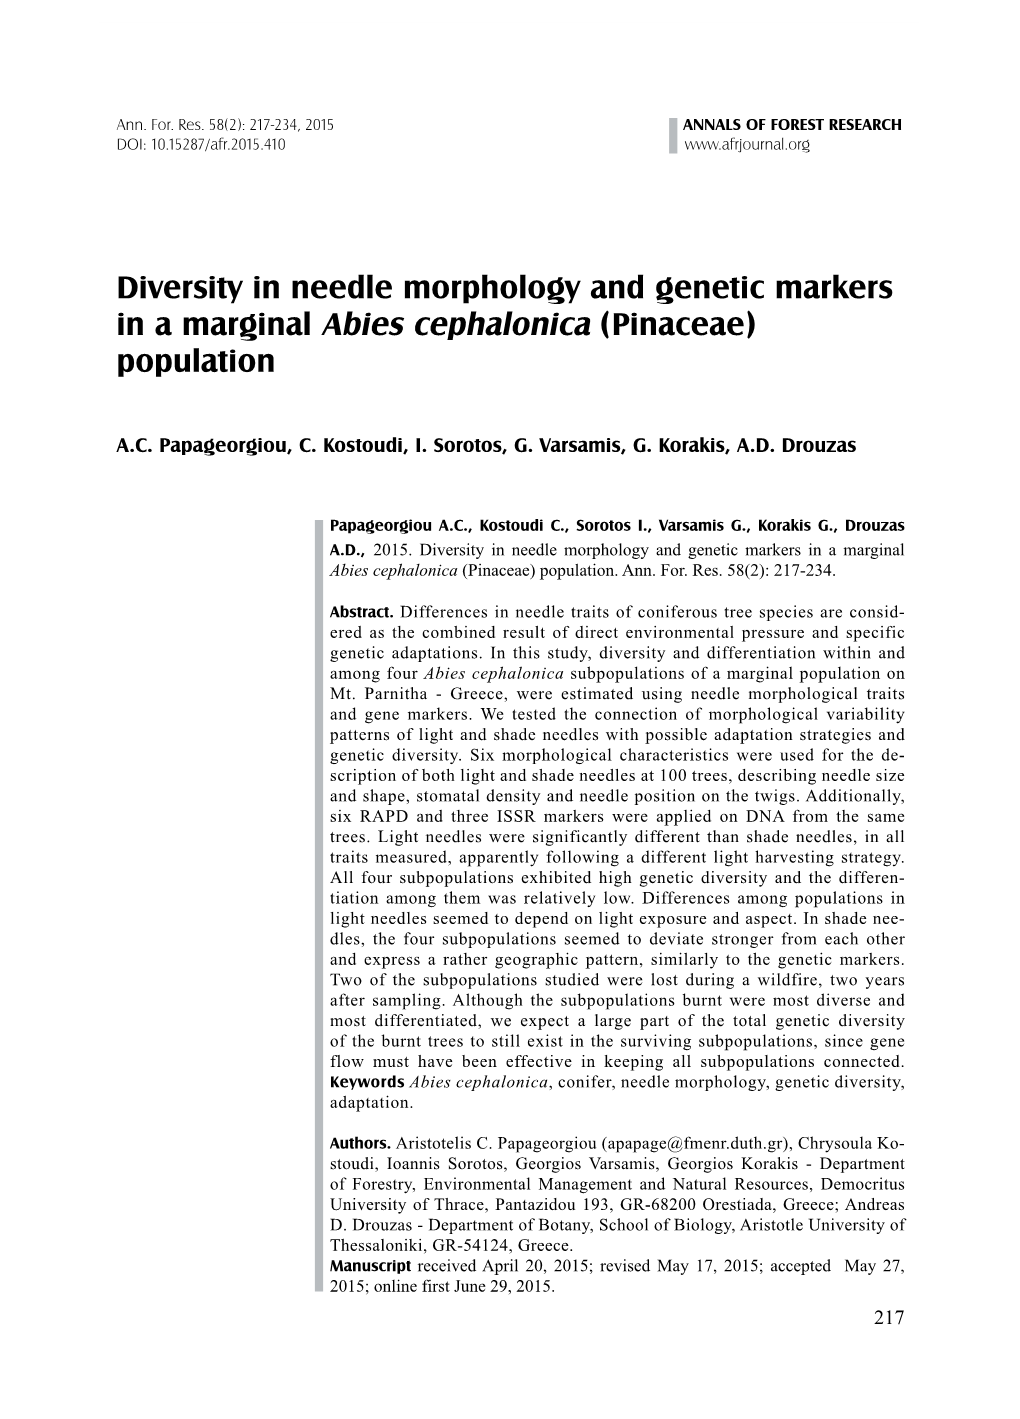 Diversity in Needle Morphology and Genetic Markers in a Marginal Abies Cephalonica (Pinaceae) Population